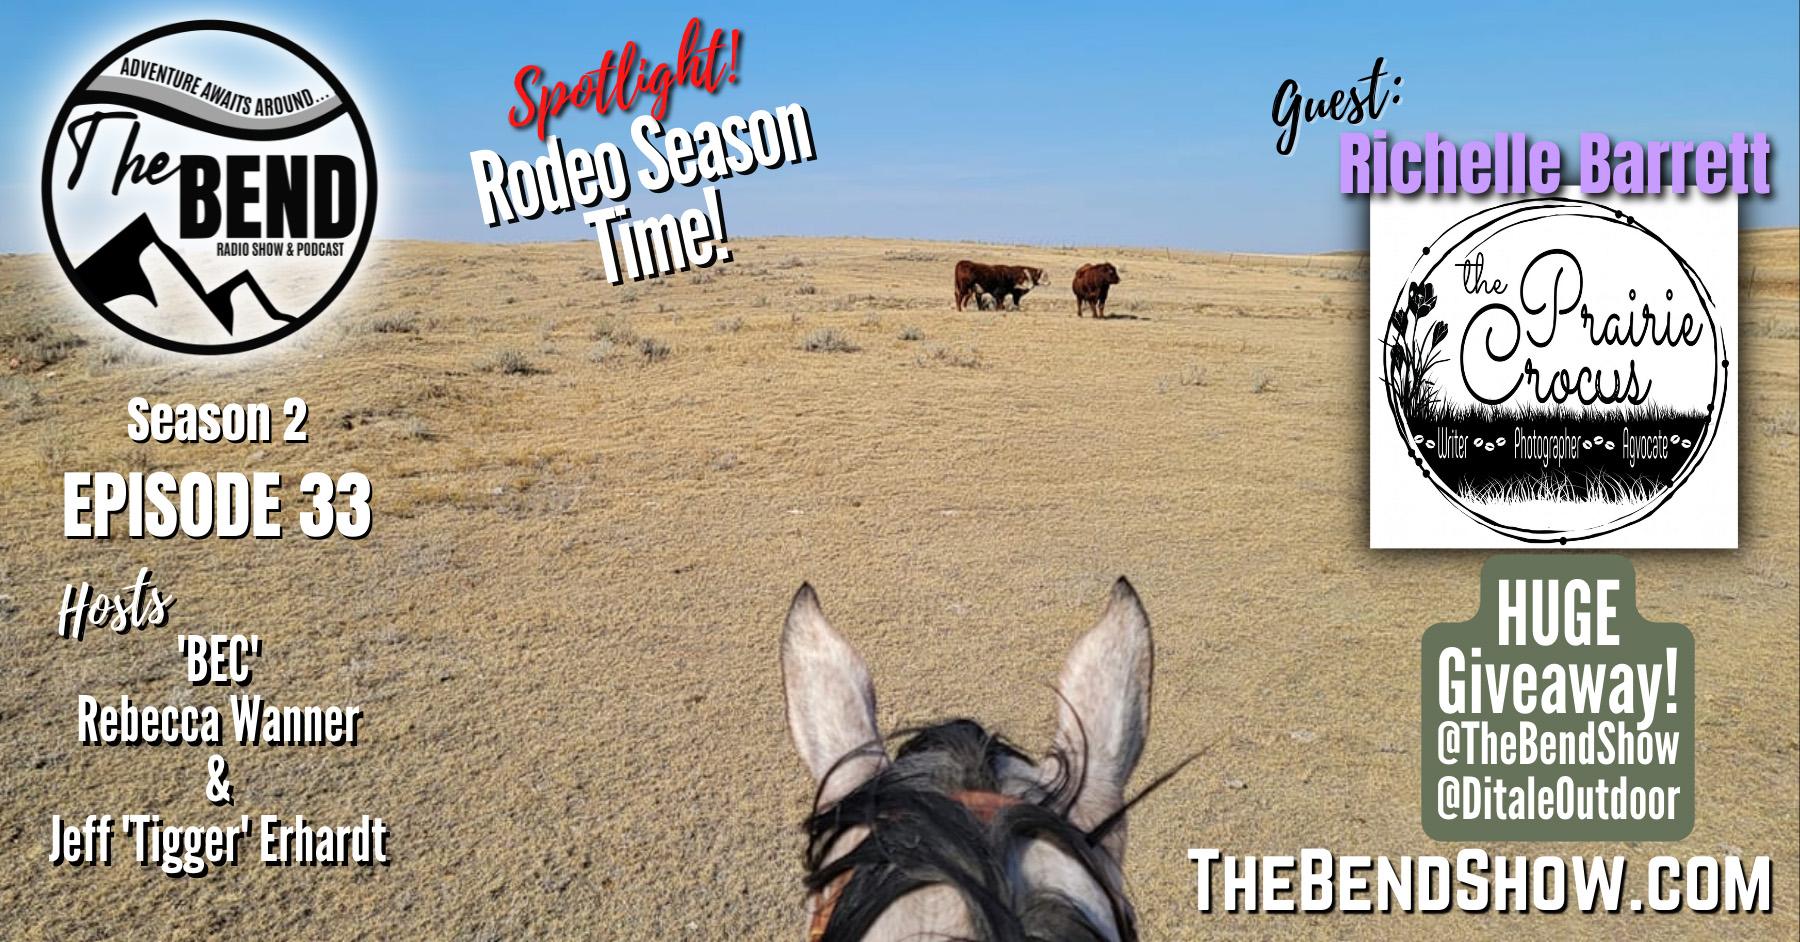 Rodeo Season, Agriculture Advocate, Recipes & More